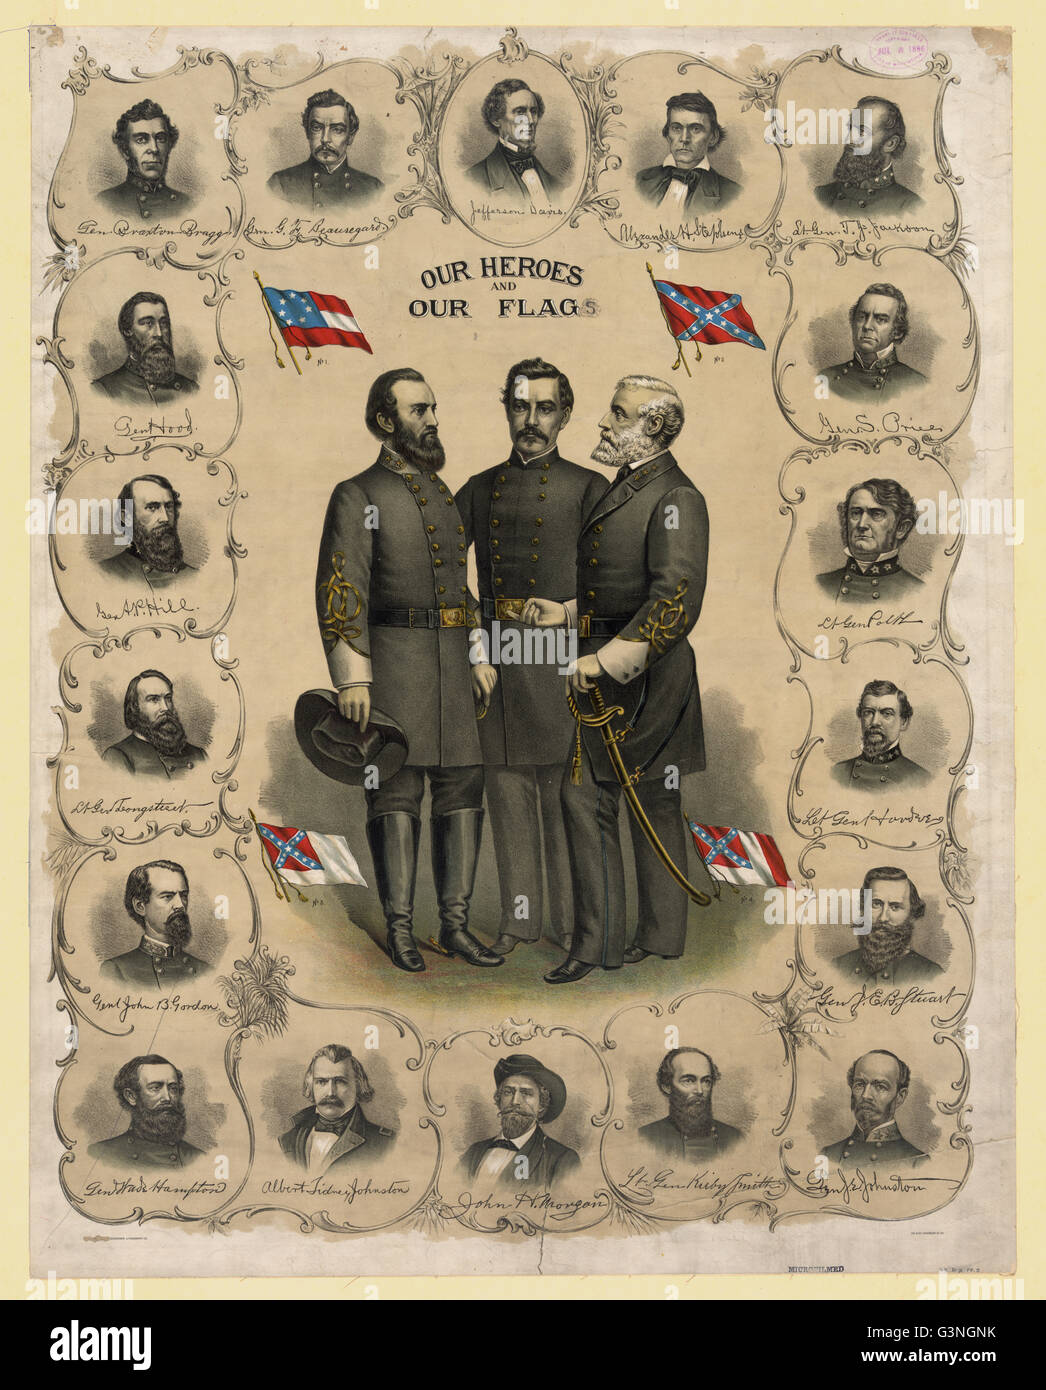 Our heroes and our flag - Print showing full-length portraits of Robert E. Lee, Stonewall Jackson, and G.T. Beauregard with four versions of the Confederate flag surrounded by bust portraits of Jefferson Davis and Confederate Army officers. Stock Photo